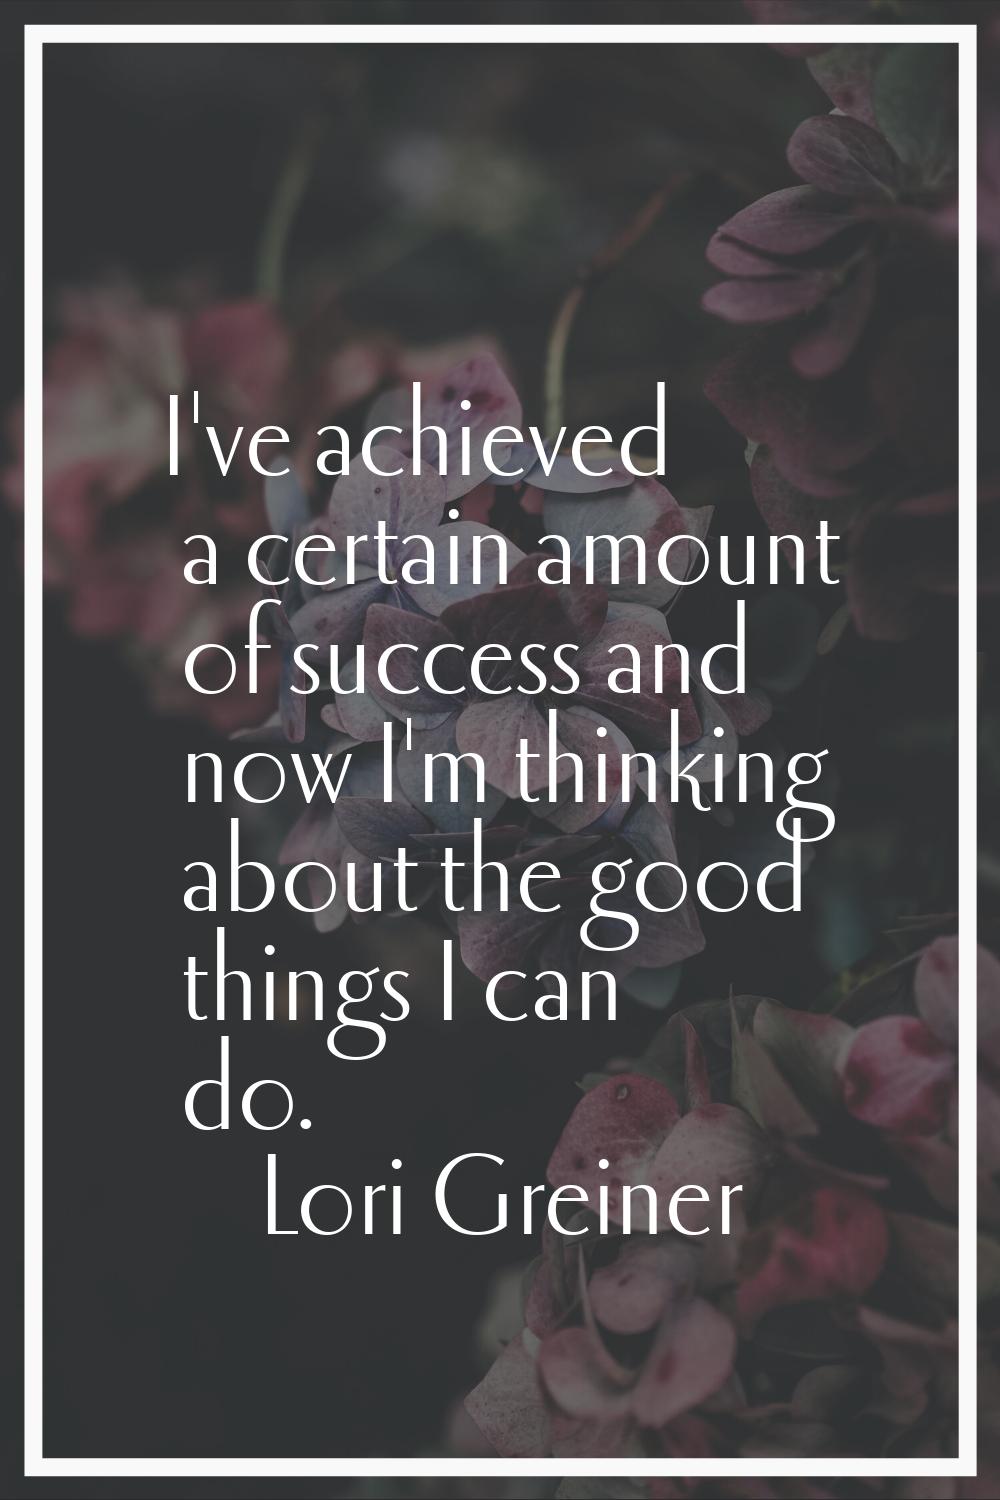 I've achieved a certain amount of success and now I'm thinking about the good things I can do.